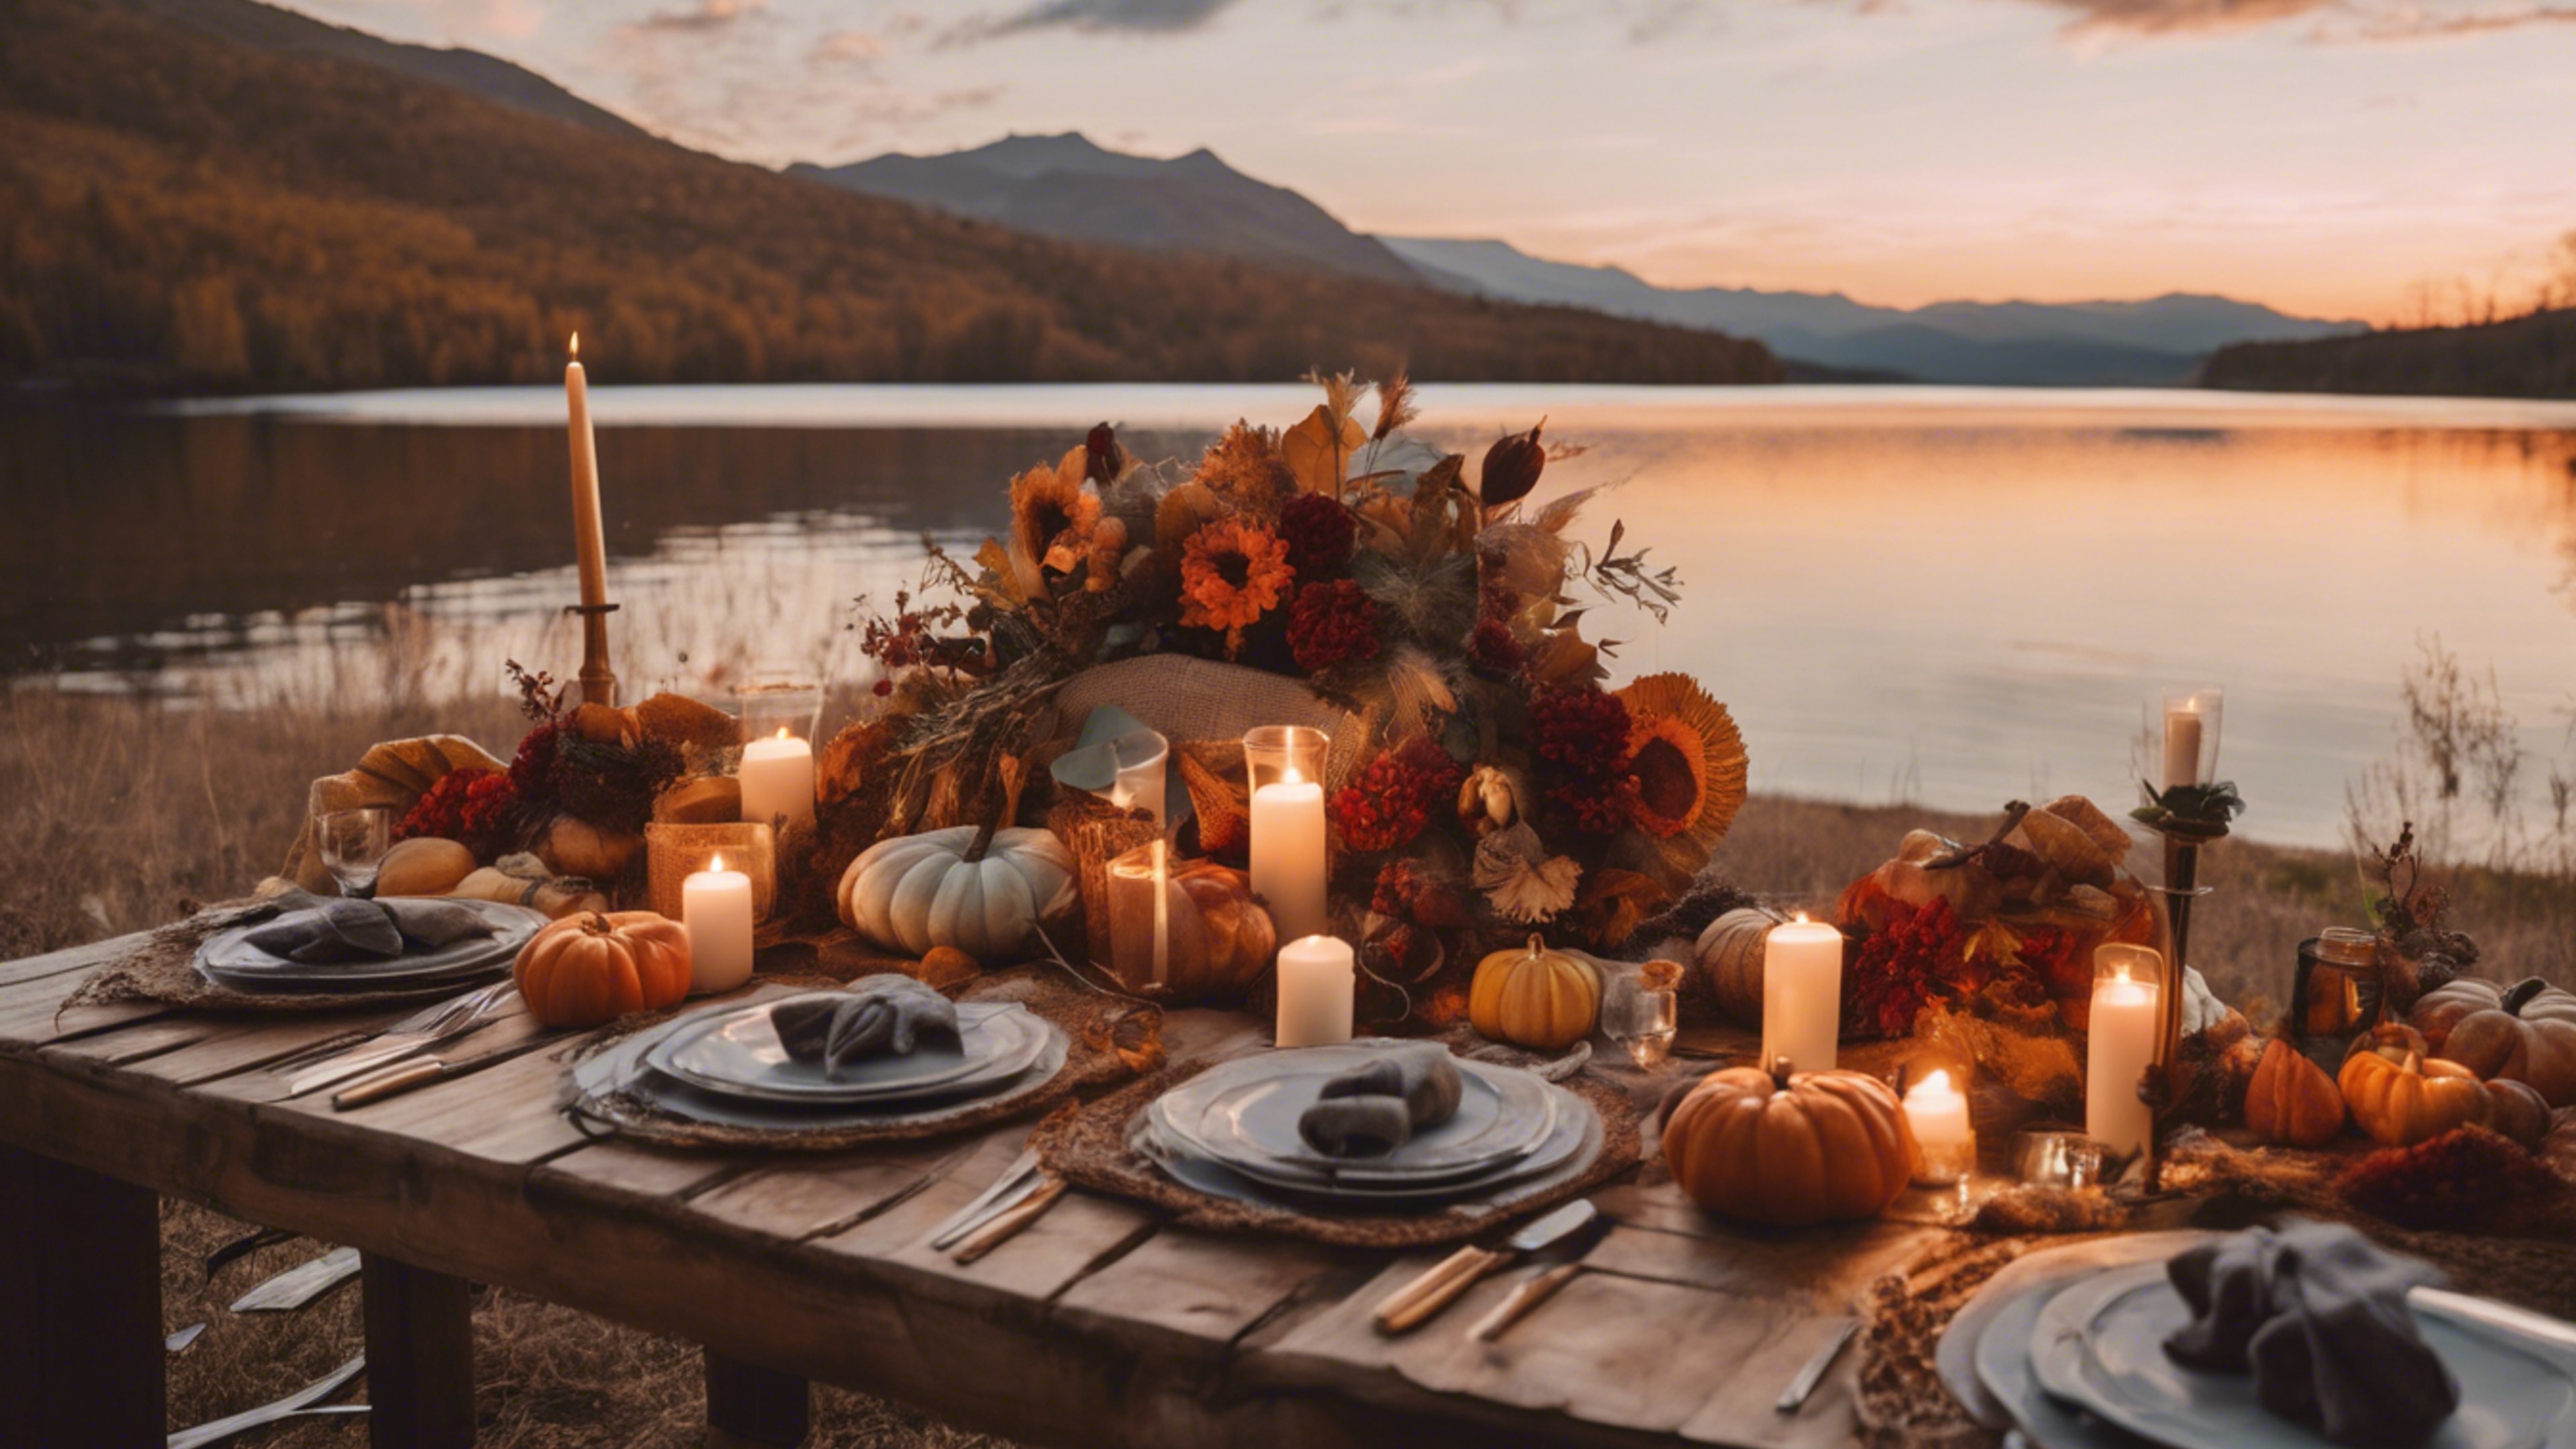 An outdoor Thanksgiving setup with boho decorations next to a breathtaking mountain lake during sunset. Sfondo[488ff8a1b73146e3b682]